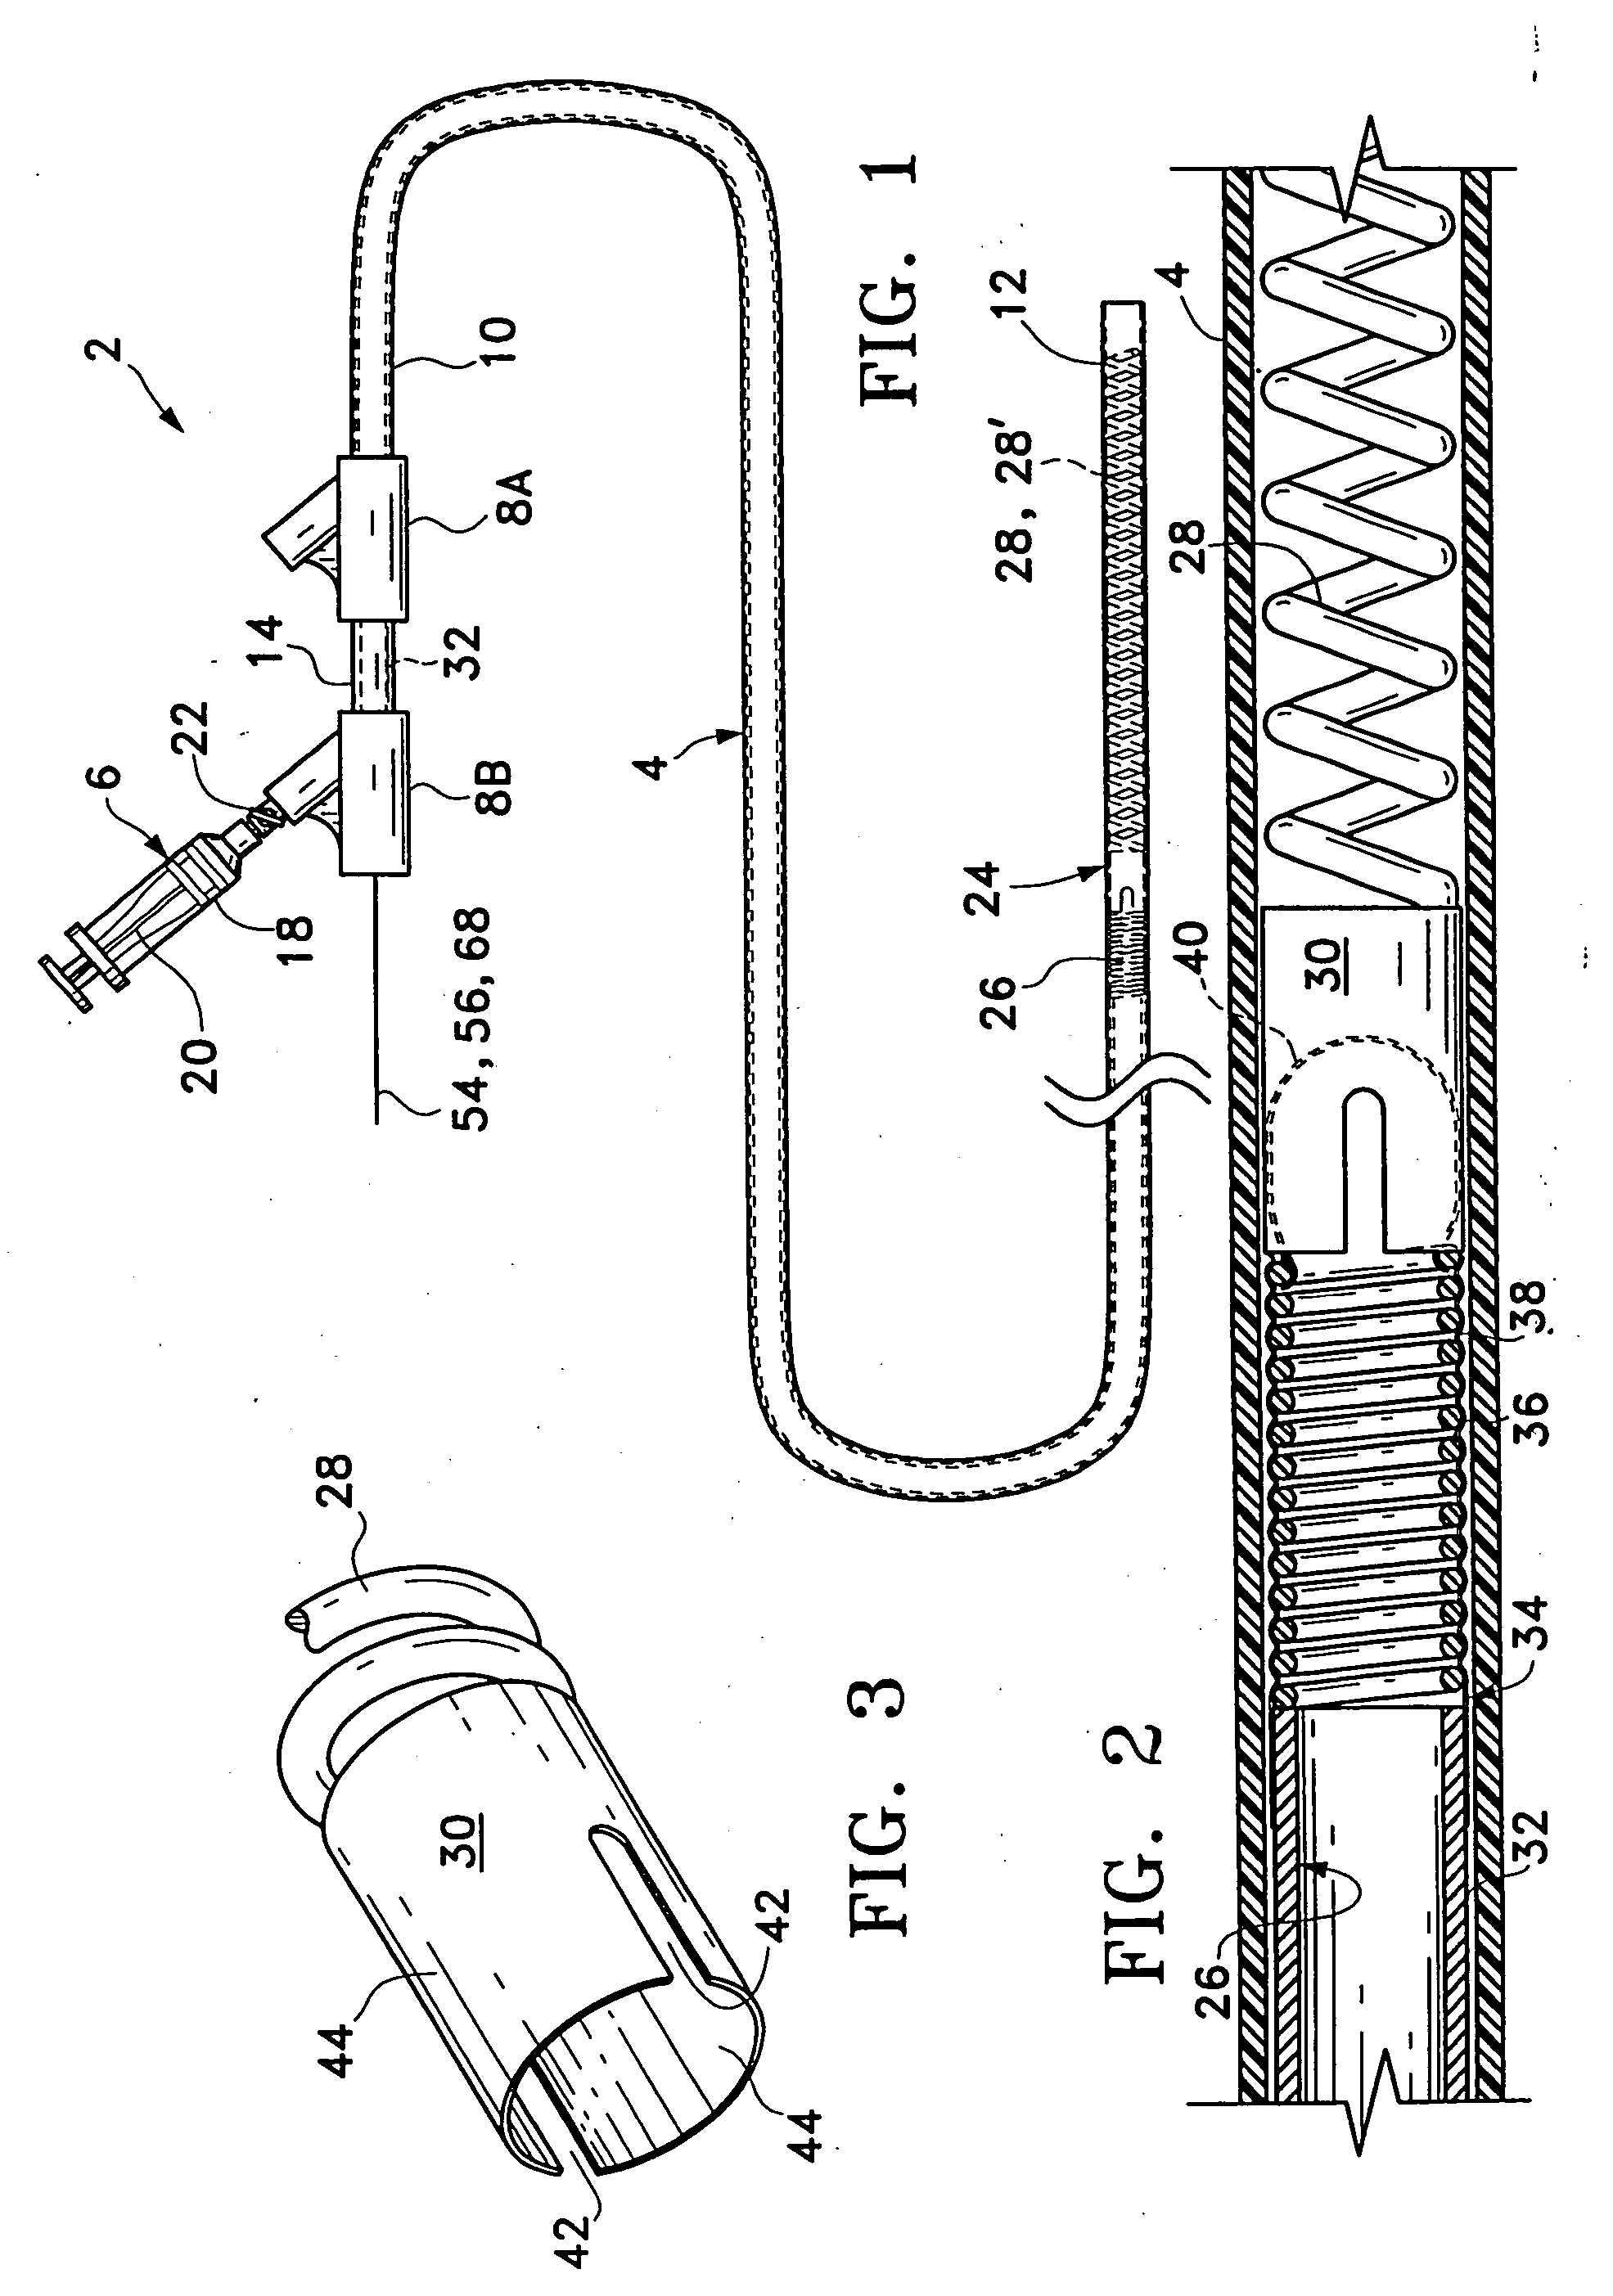 Implant delivery assembly with expandable coupling/decoupling mechanism